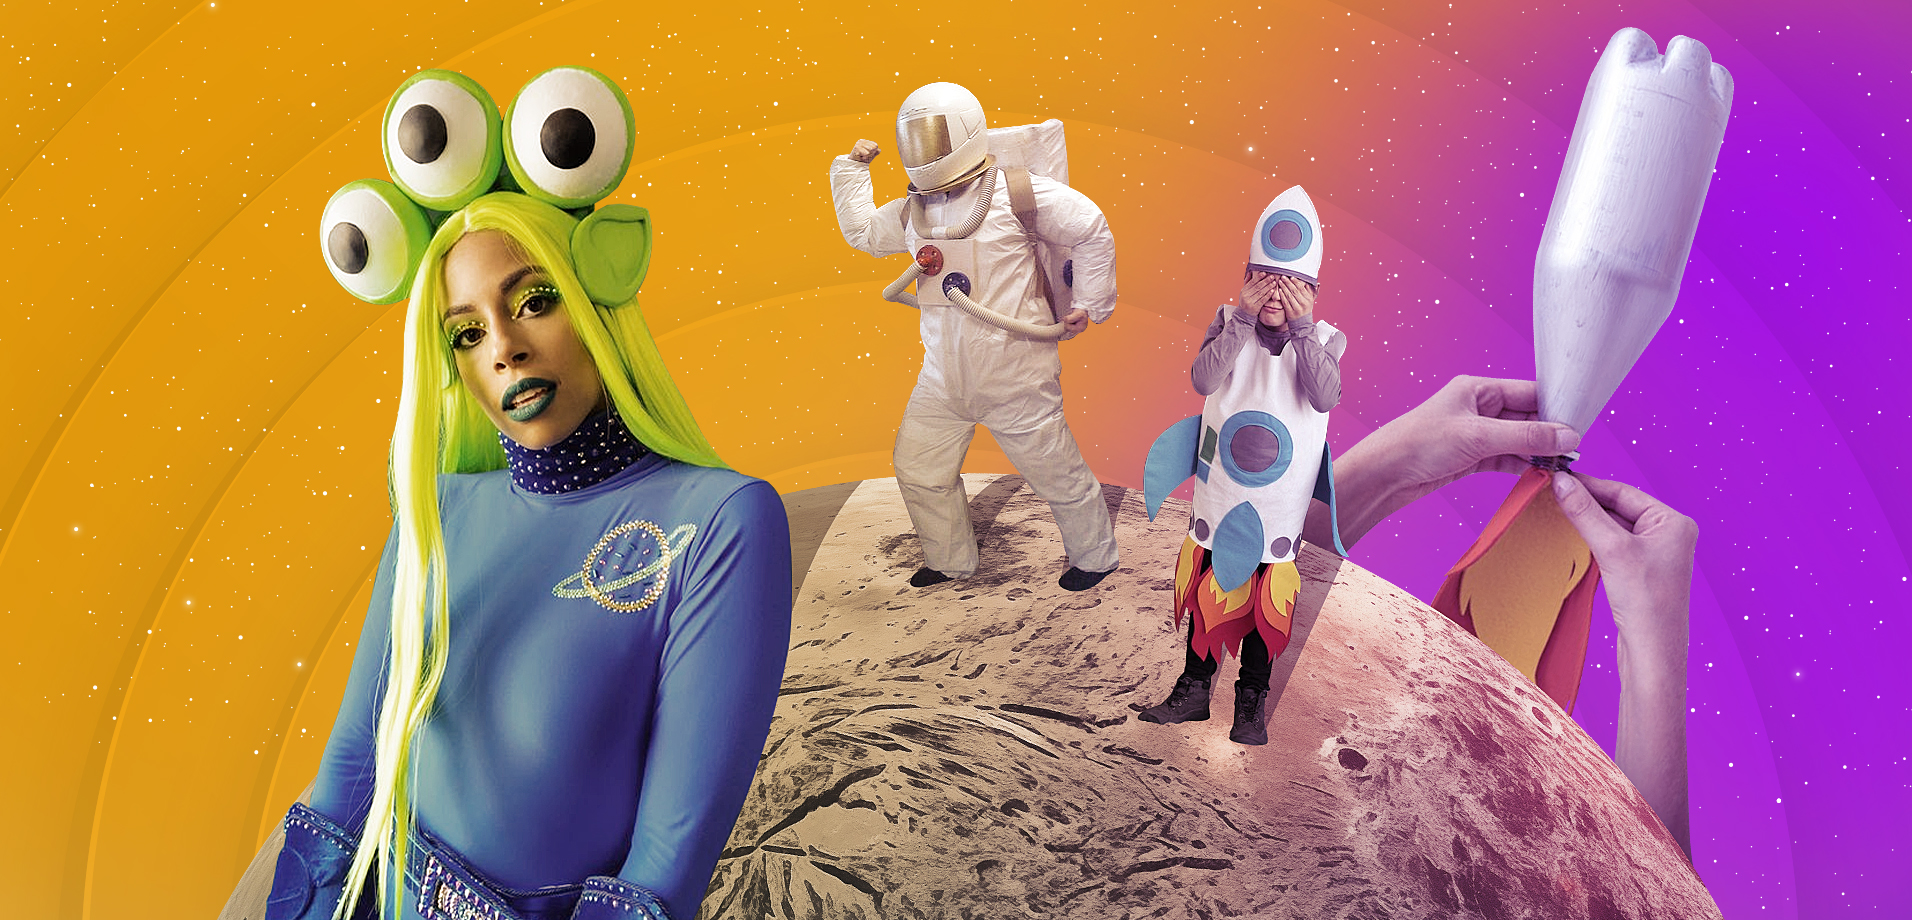 Halloween Costume Ideas: 16 Space Theme Outfits You Need To Try